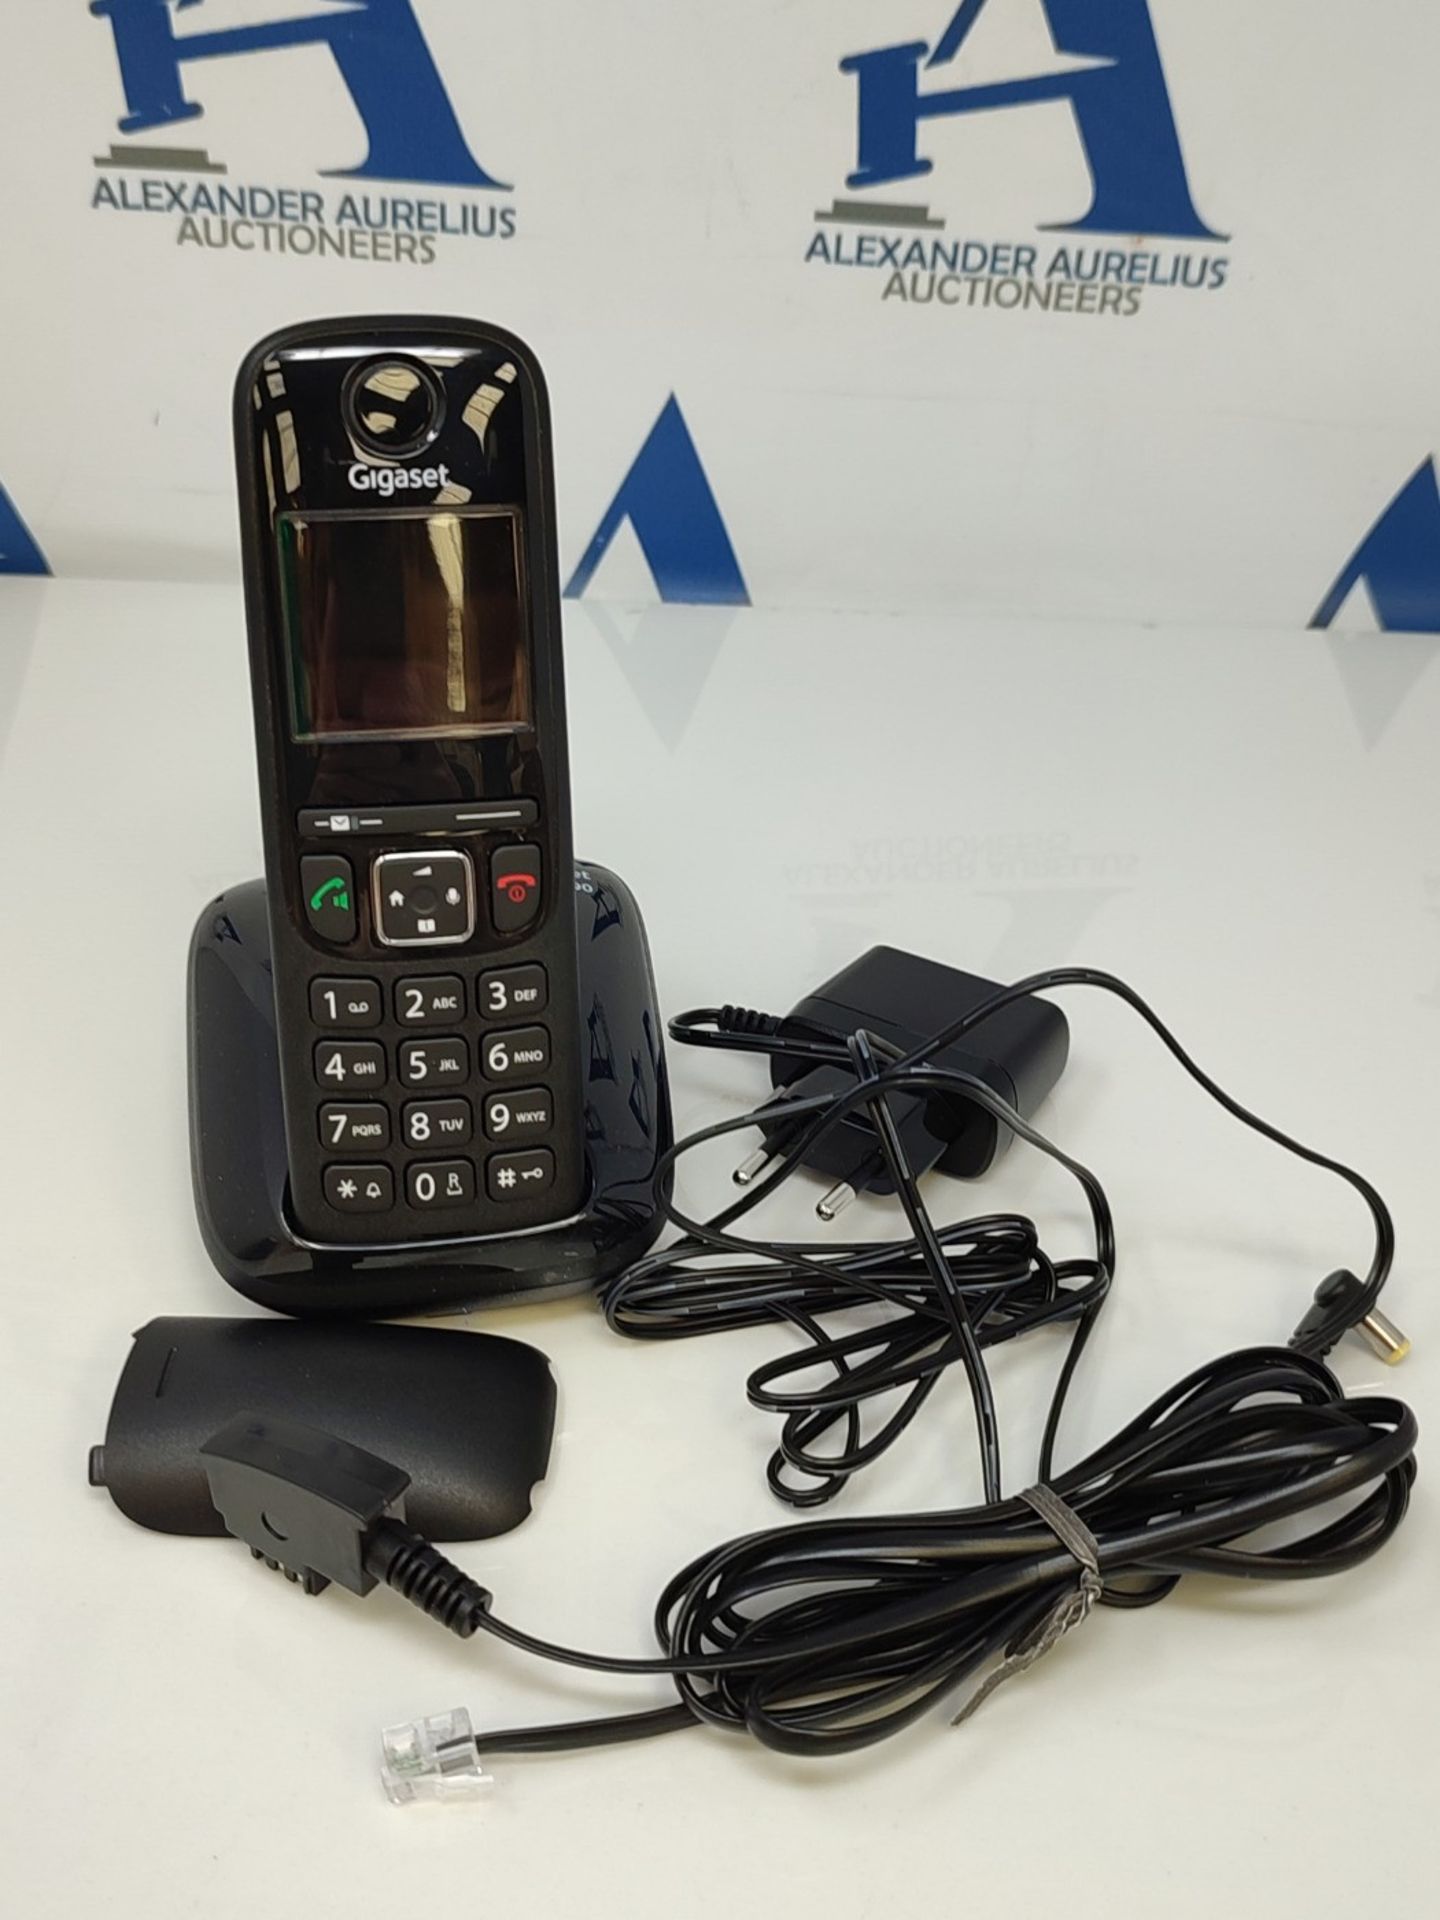 Gigaset AS690 - Cordless DECT Telephone - large, high-contrast display - brilliant aud - Image 2 of 2